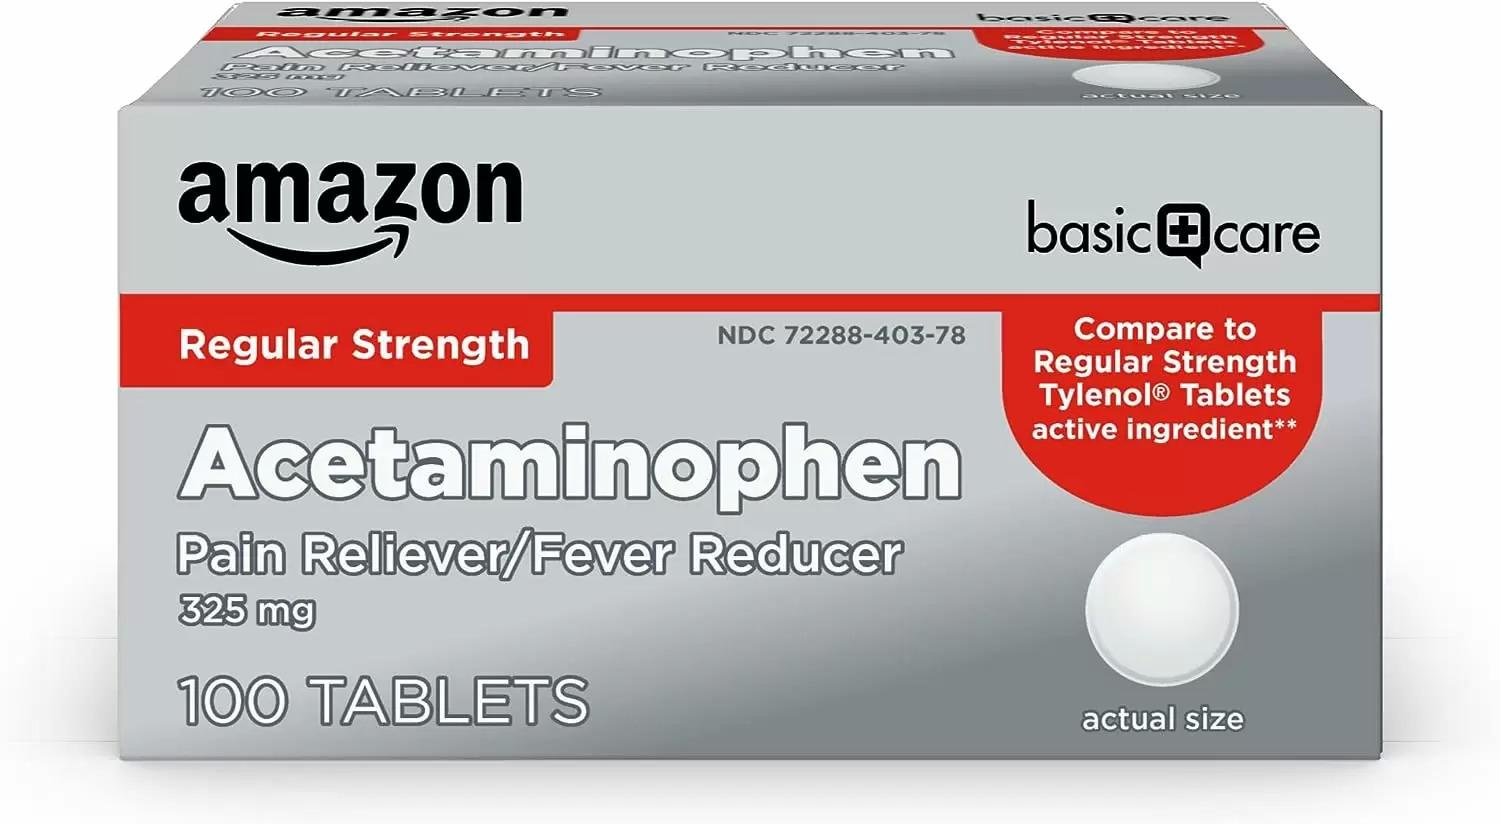 Amazon Basic Acetaminophen Care Pain Relief 100 Pack for $1.91 Shipped